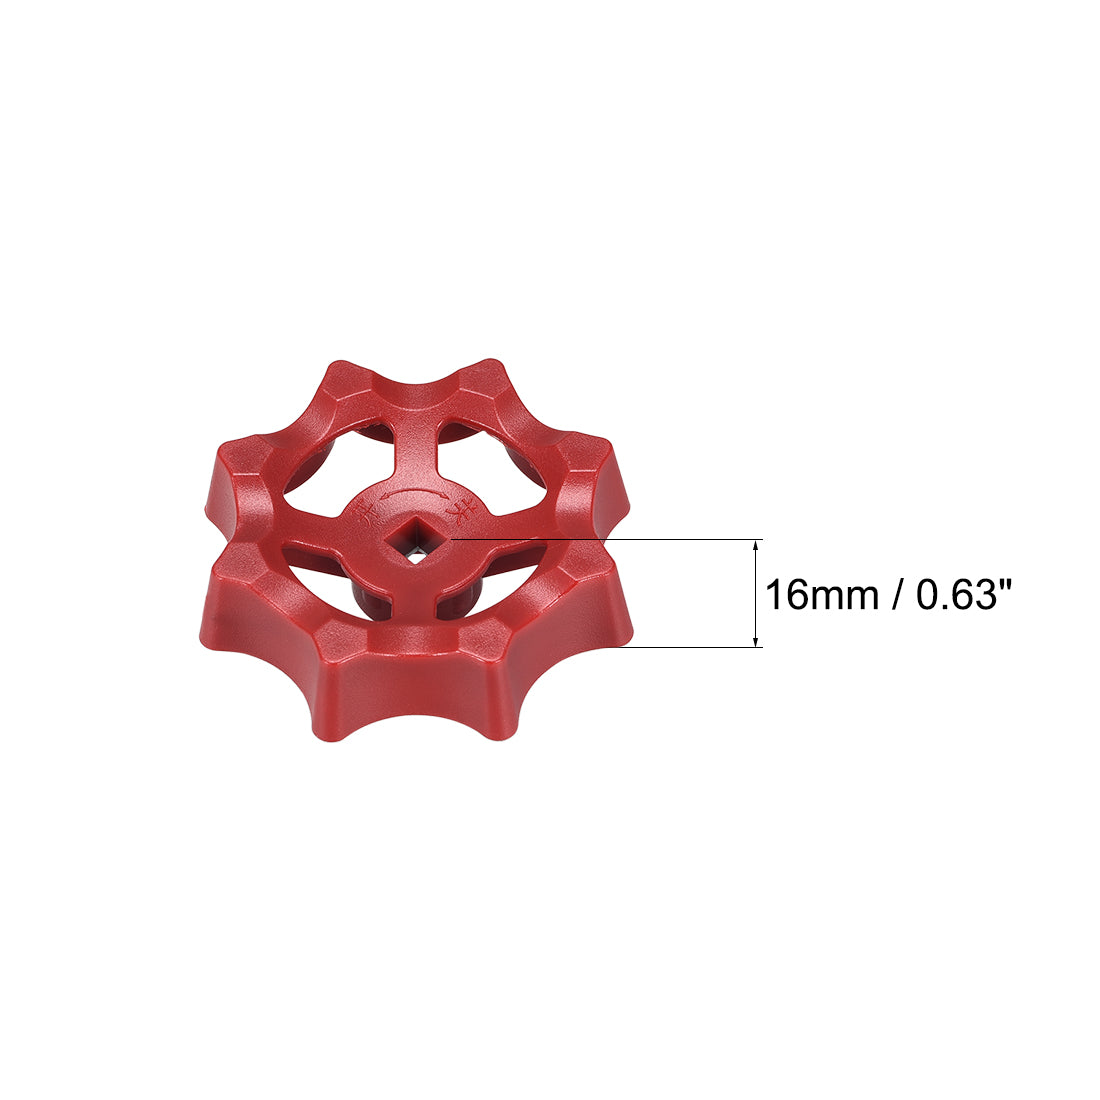 Uxcell Uxcell Round Wheel Handle, Square Broach 6x6mm, Wheel OD 63mm ABS Red 2Pcs